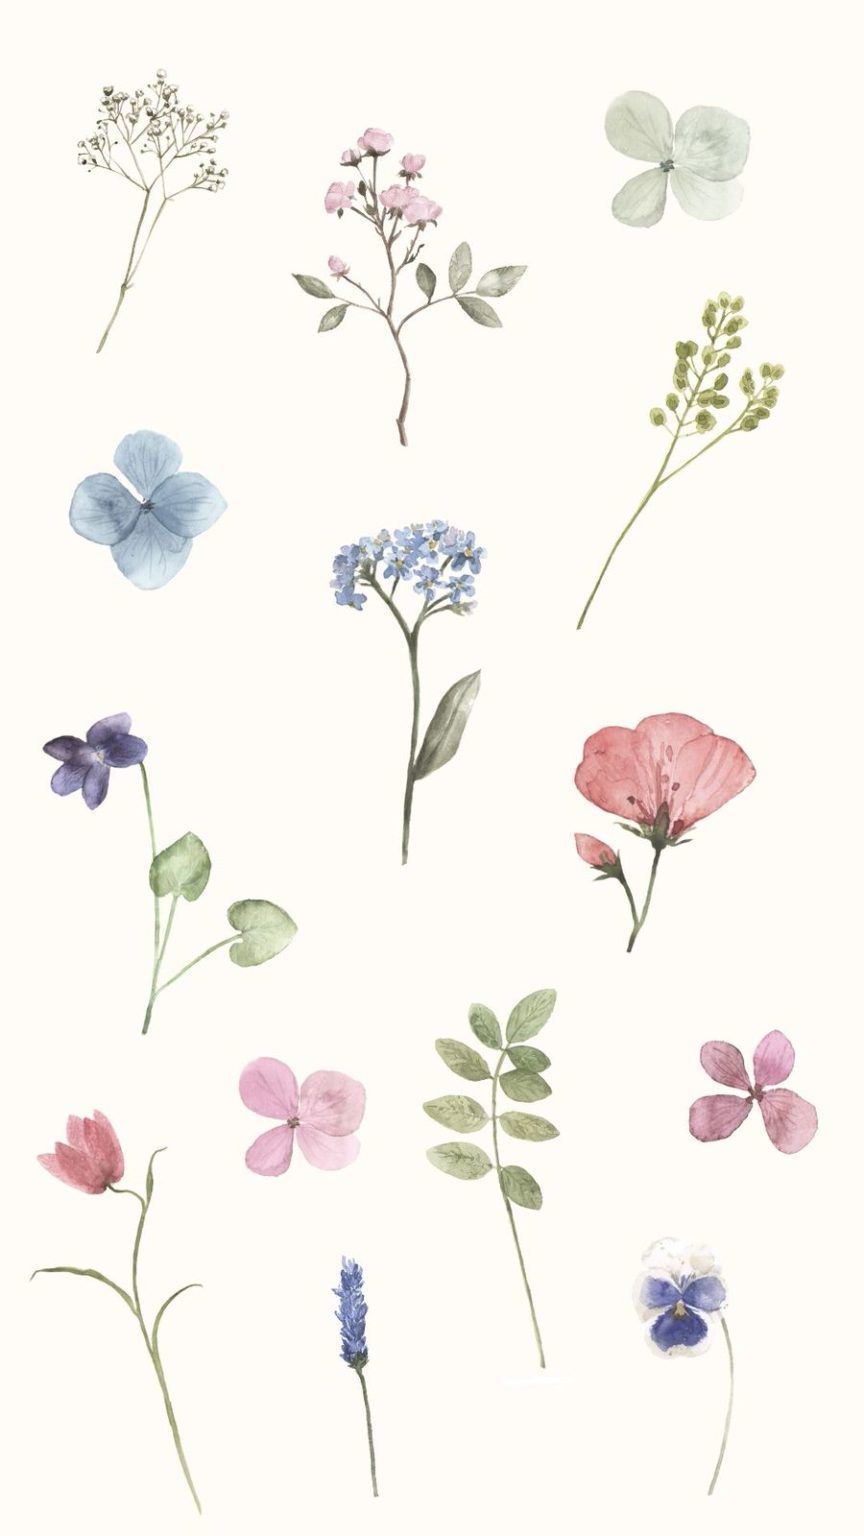 Aesthetic flowers to use as phone background. - Spring